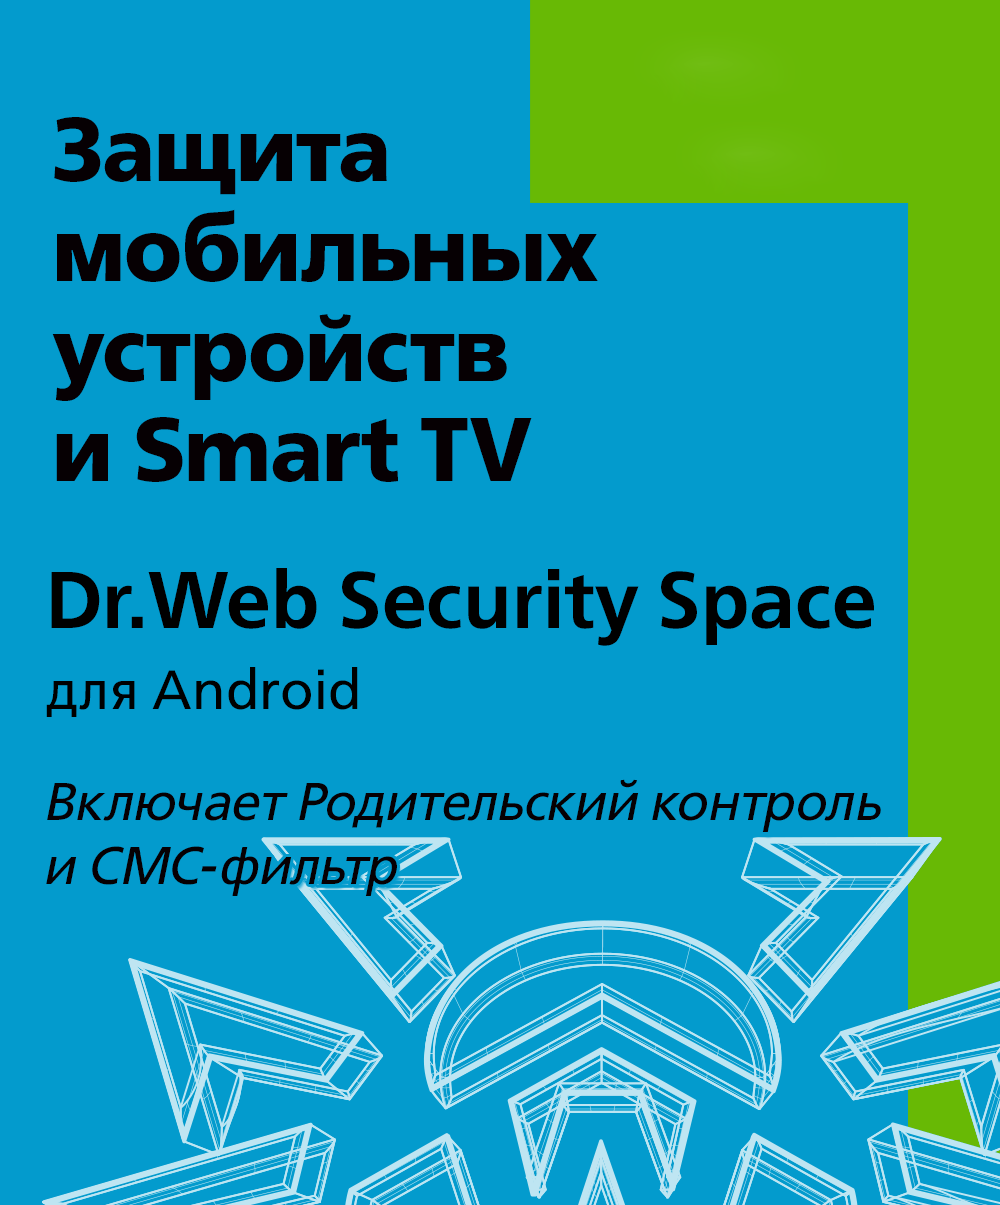 Dr.Web Security Space (for mobile devices) - for 3 devices, for 36 months, KZ